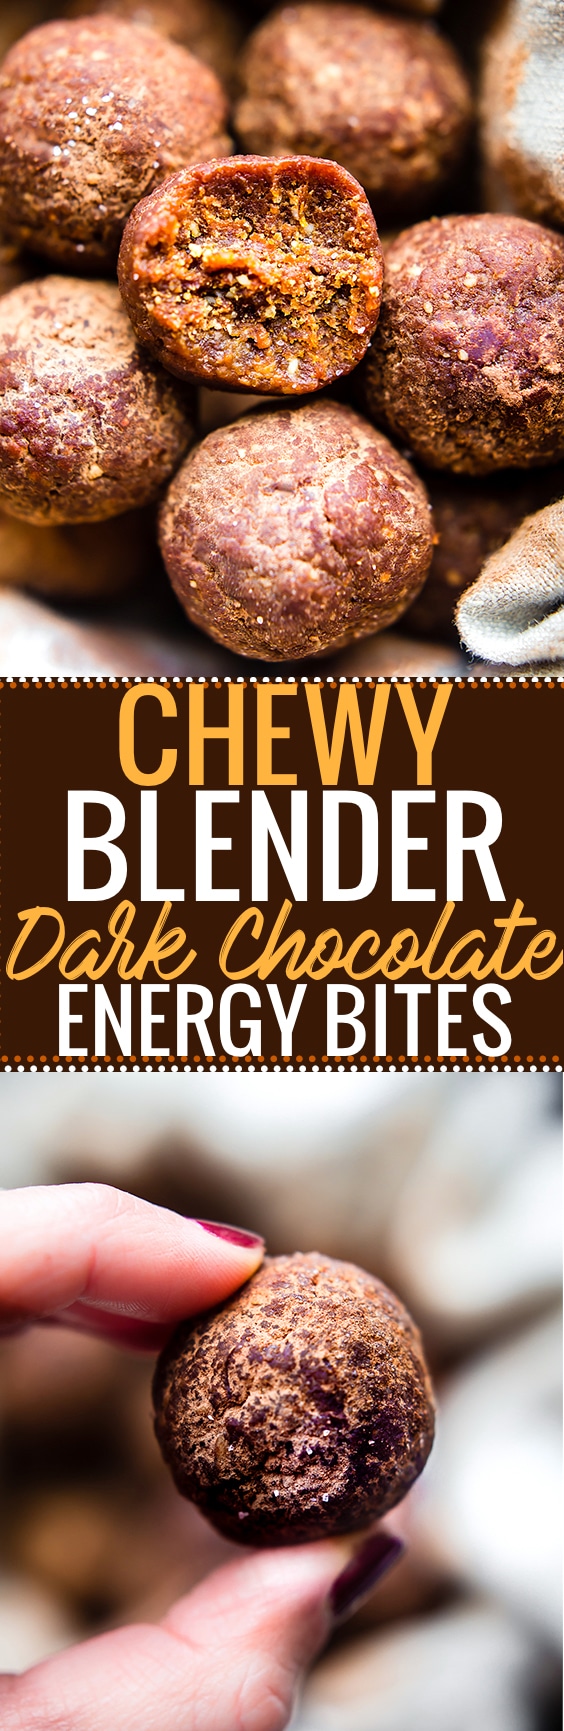 Chocolate Chewy Energy Bites made right in your blender! These dark chocolate energy bites are just 5 ingredients, sweet, chewy, and absolutely delicious! Paleo, Vegan, and Whole 30 friendly! An energizing chewy snack that perfect for anytime of day! @vitamix @cottercrunch www.cottercrunch.com